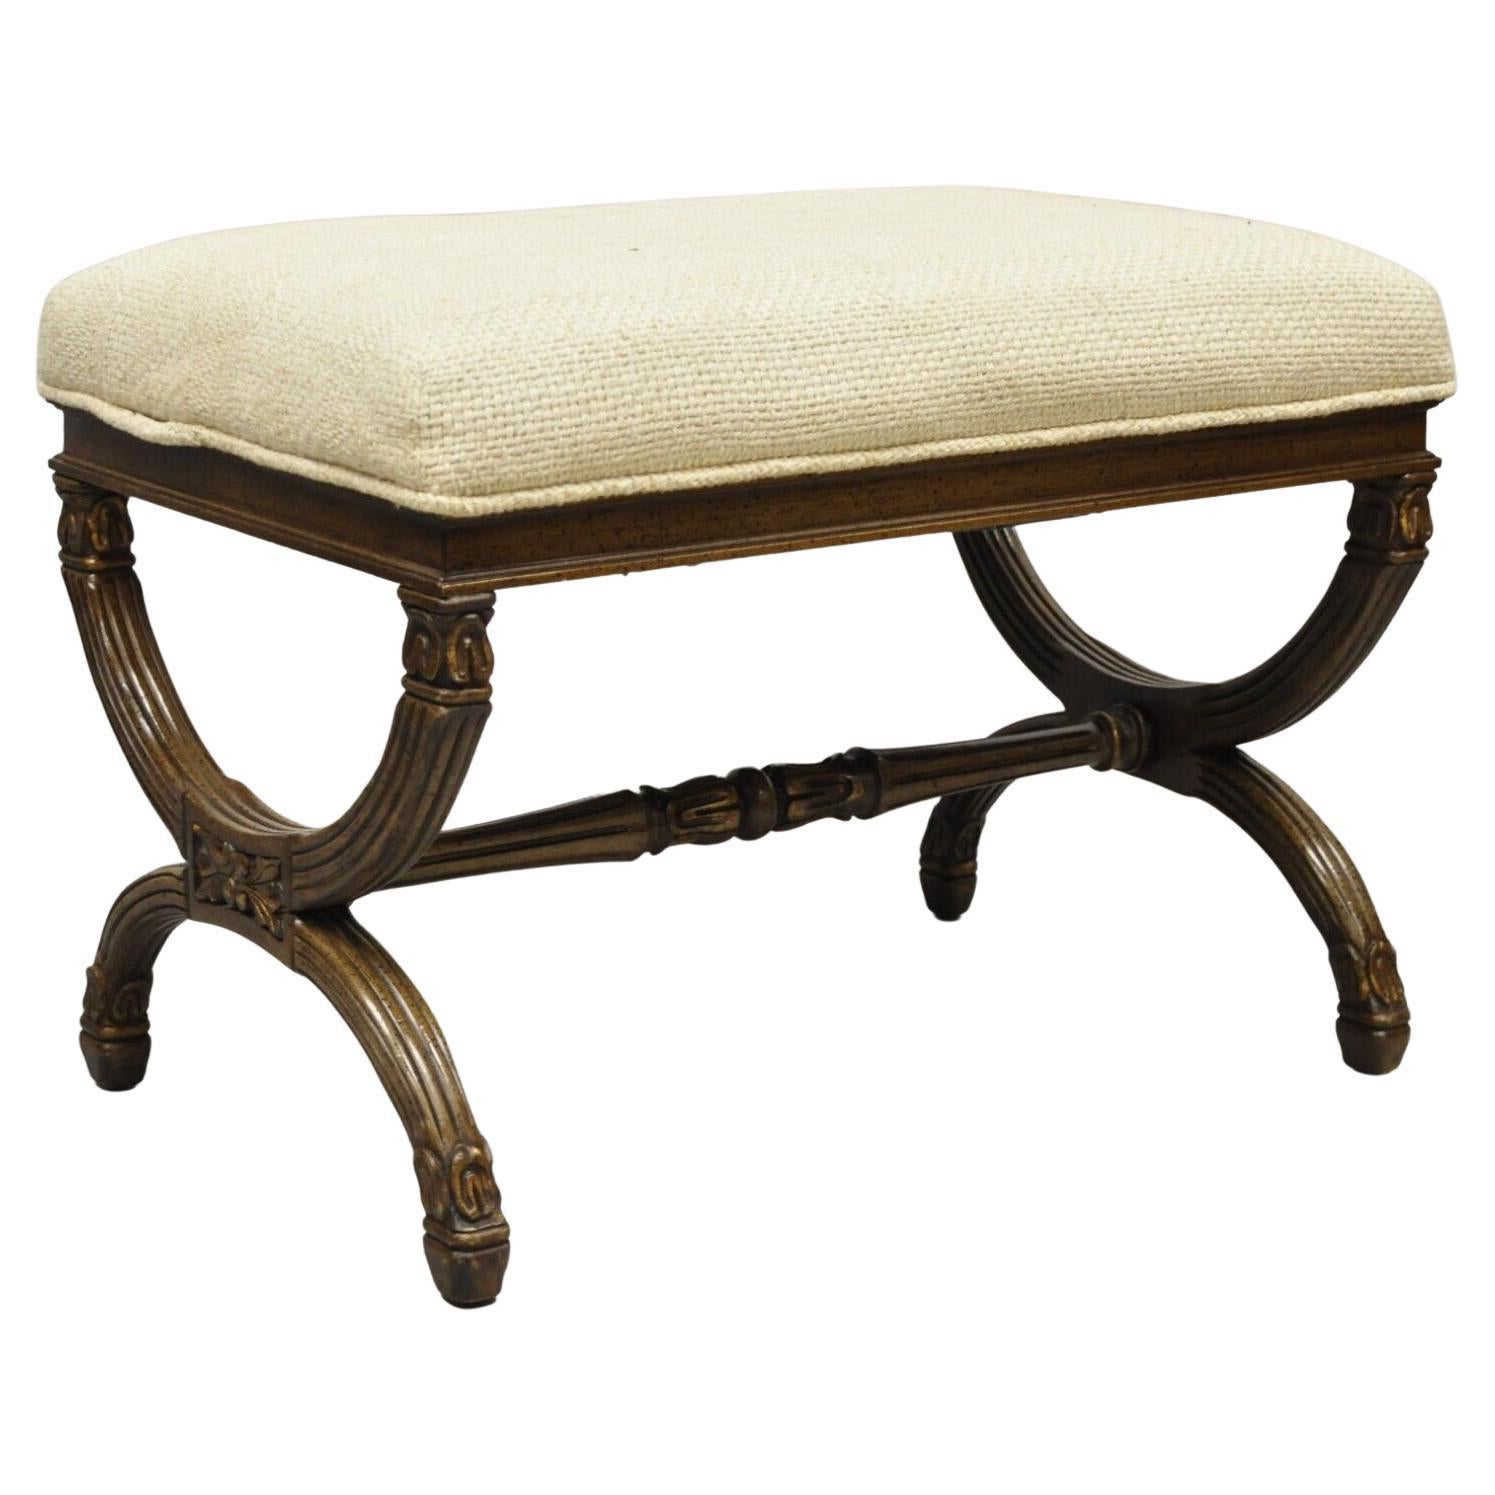 Vintage X-form Italian Neoclassical Style Carved Wood X-frame Bench